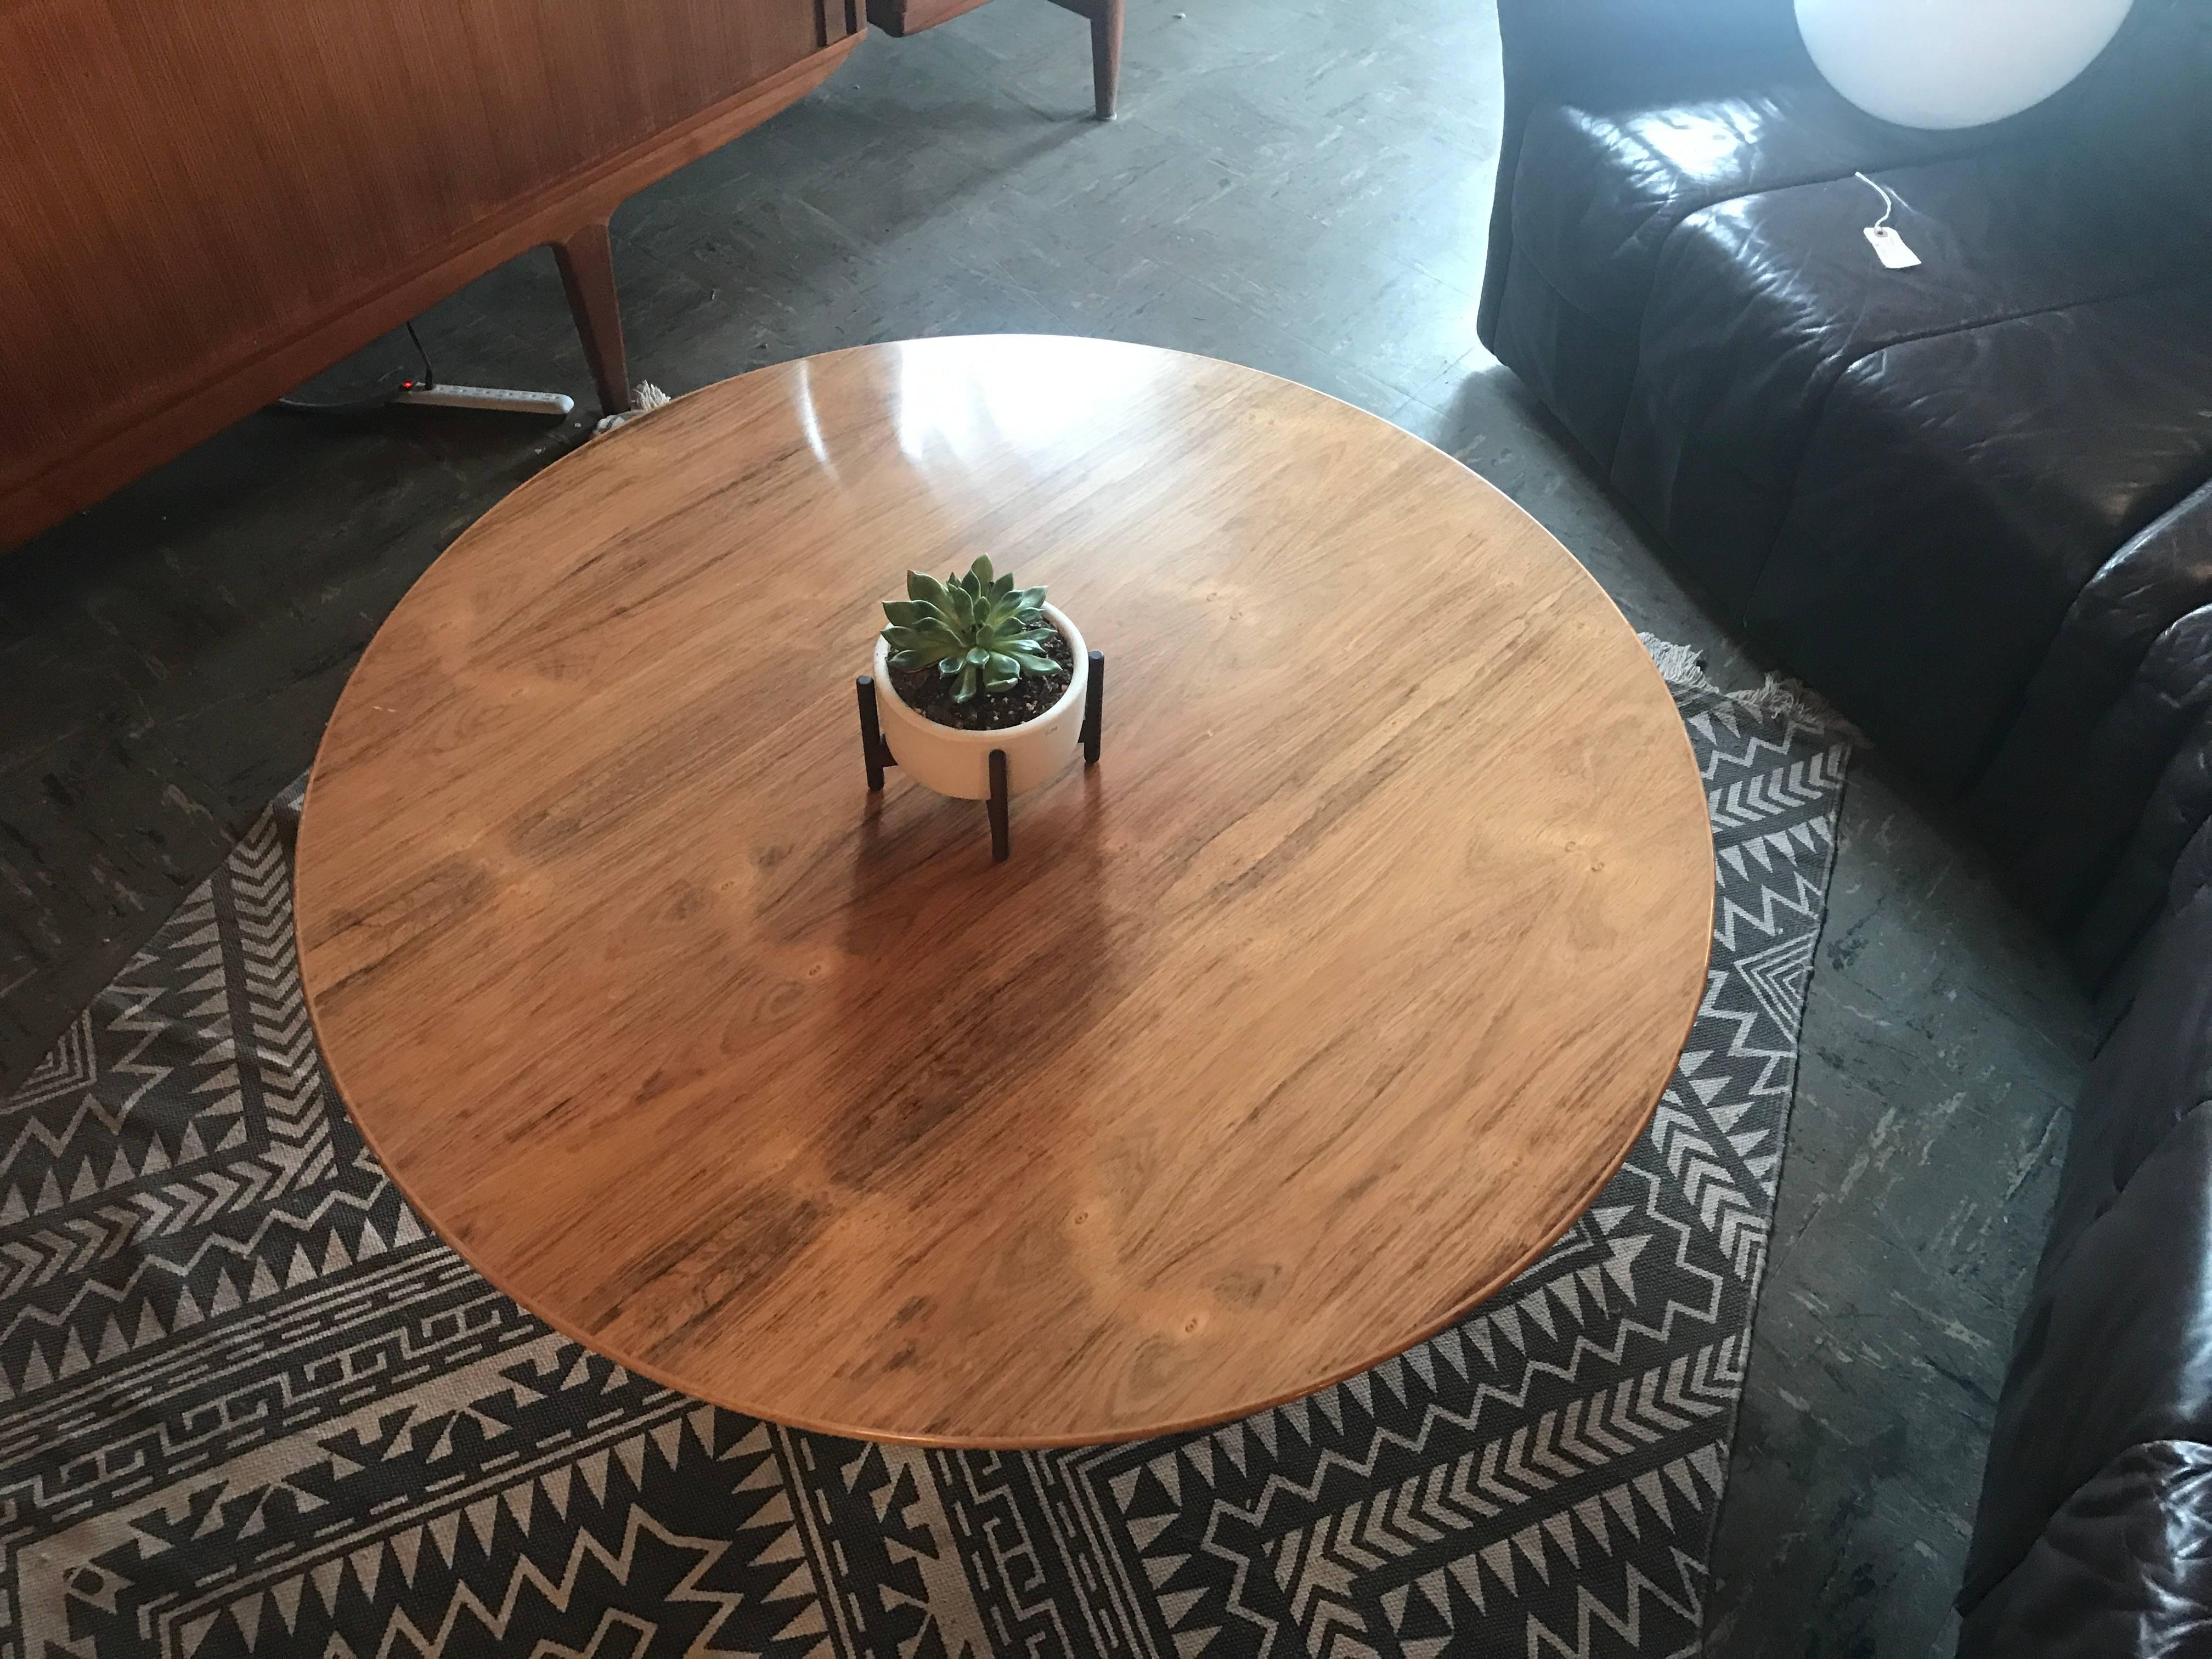 Early Eero Saarinen for Knoll rosewood tulip coffee table in great vintage condition.
Heavy table.